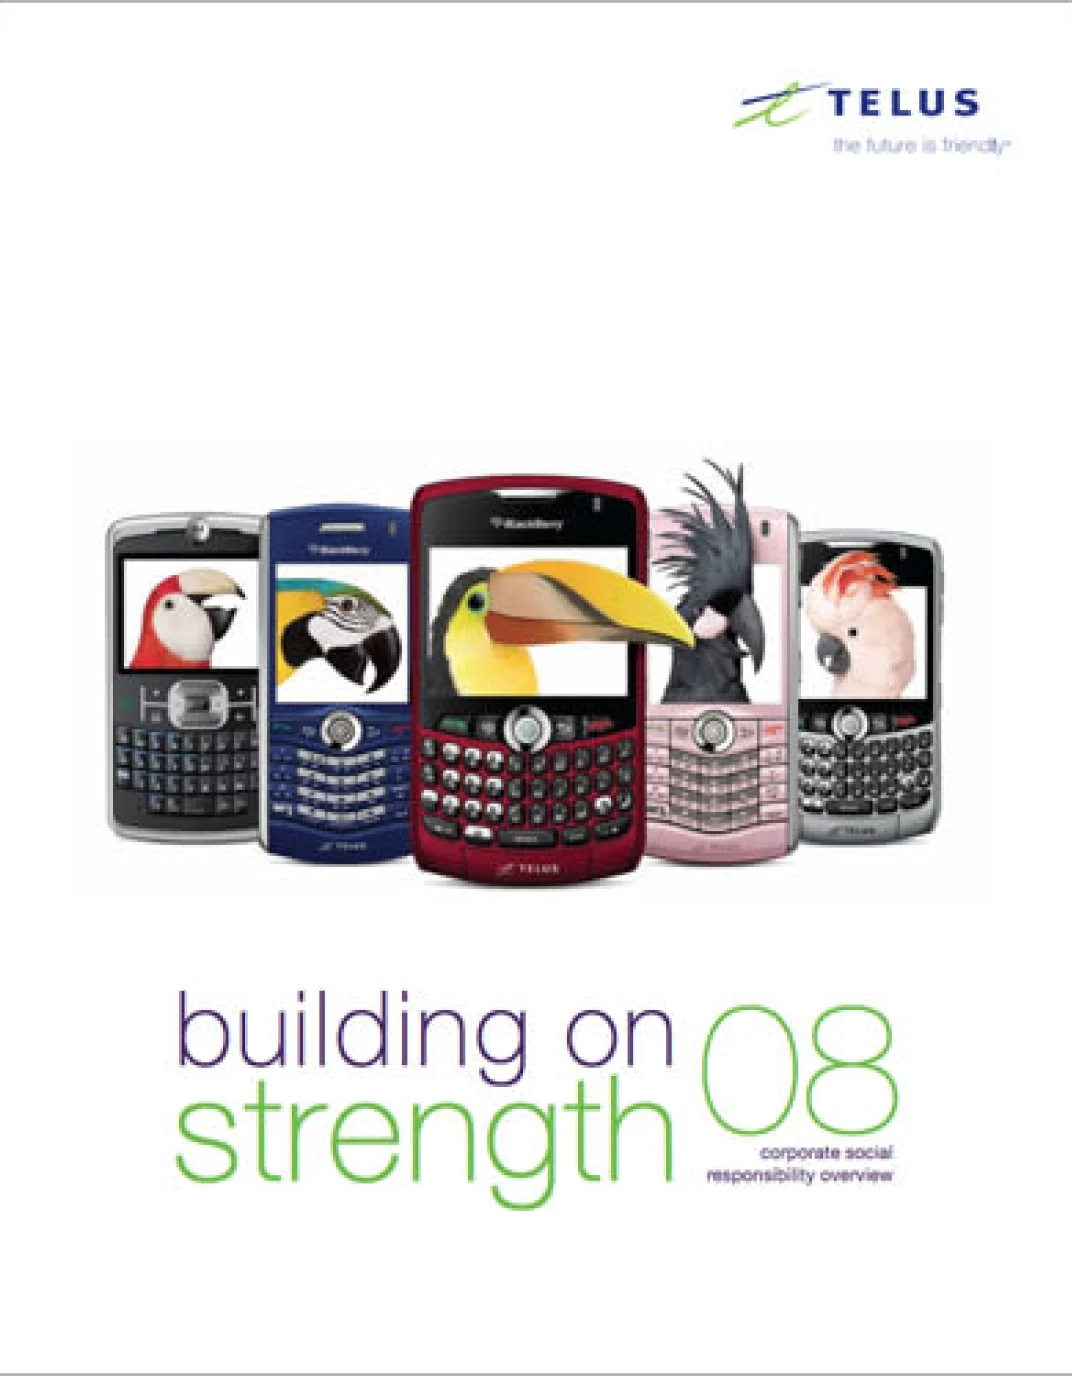  The cover of the 2008 TELUS Sustainability Report